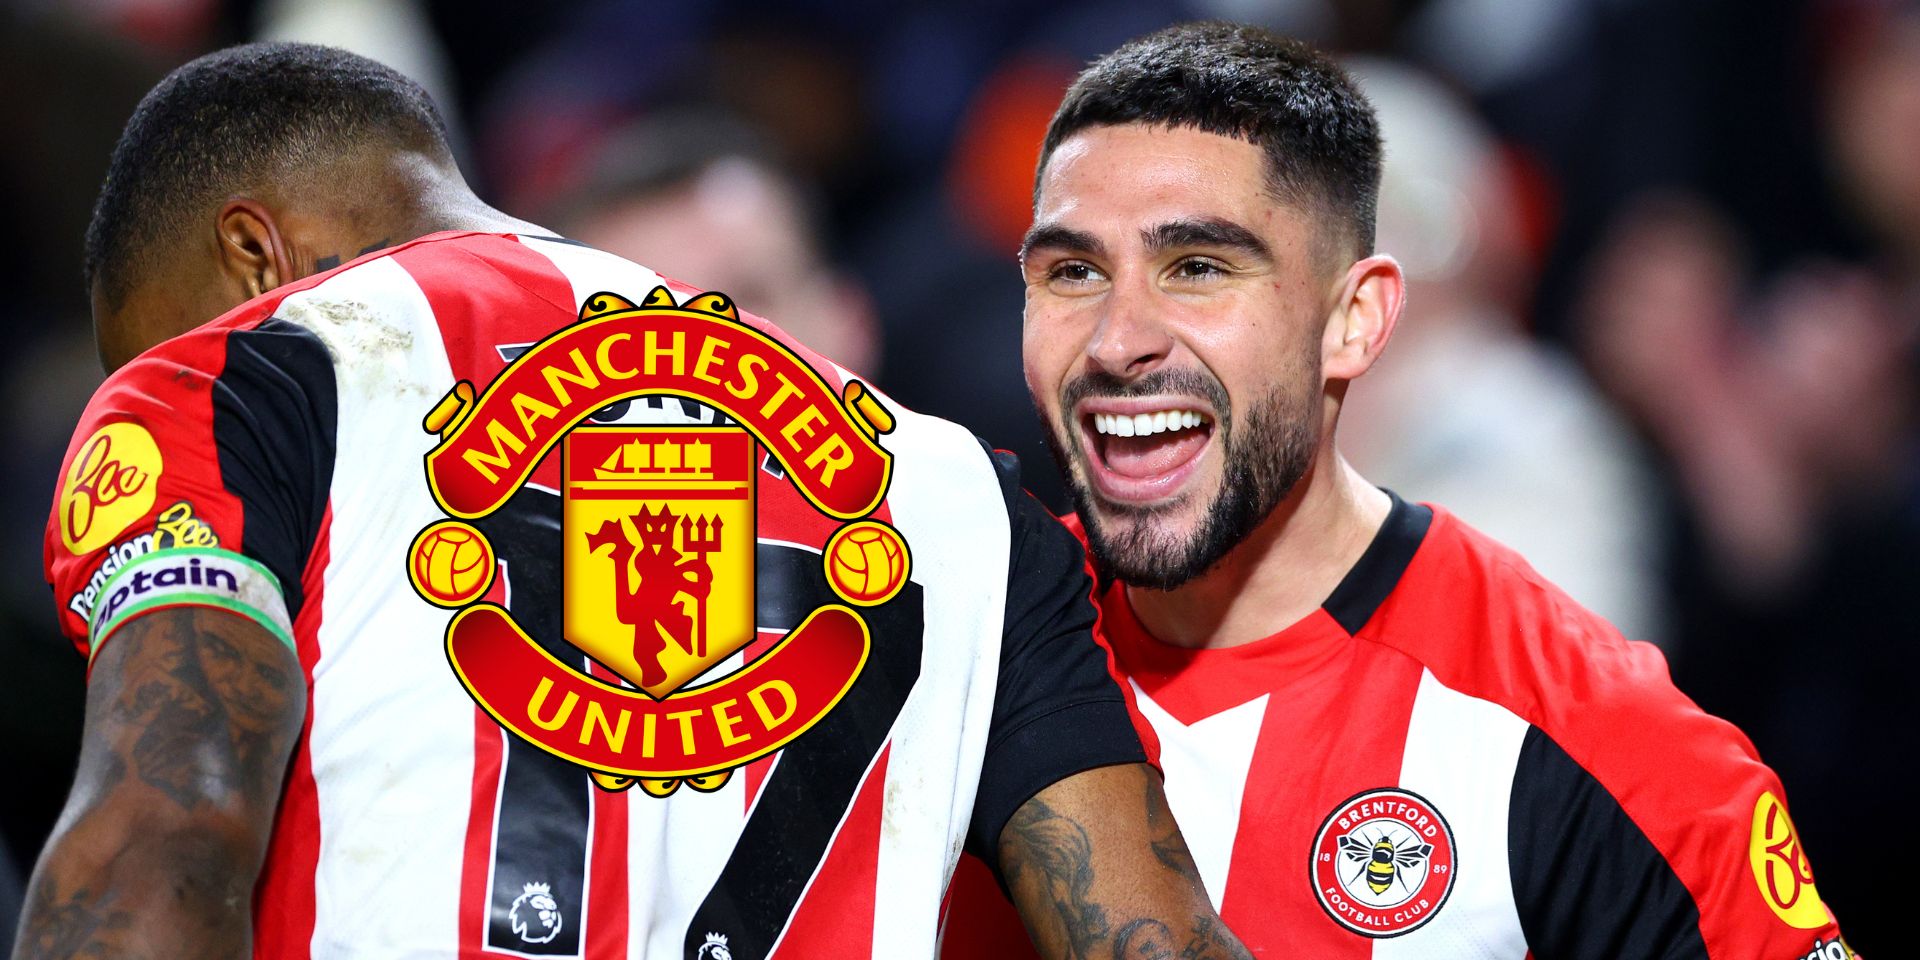 Liverpool fans will crease at Neal Maupay’s savage Manchester United comments